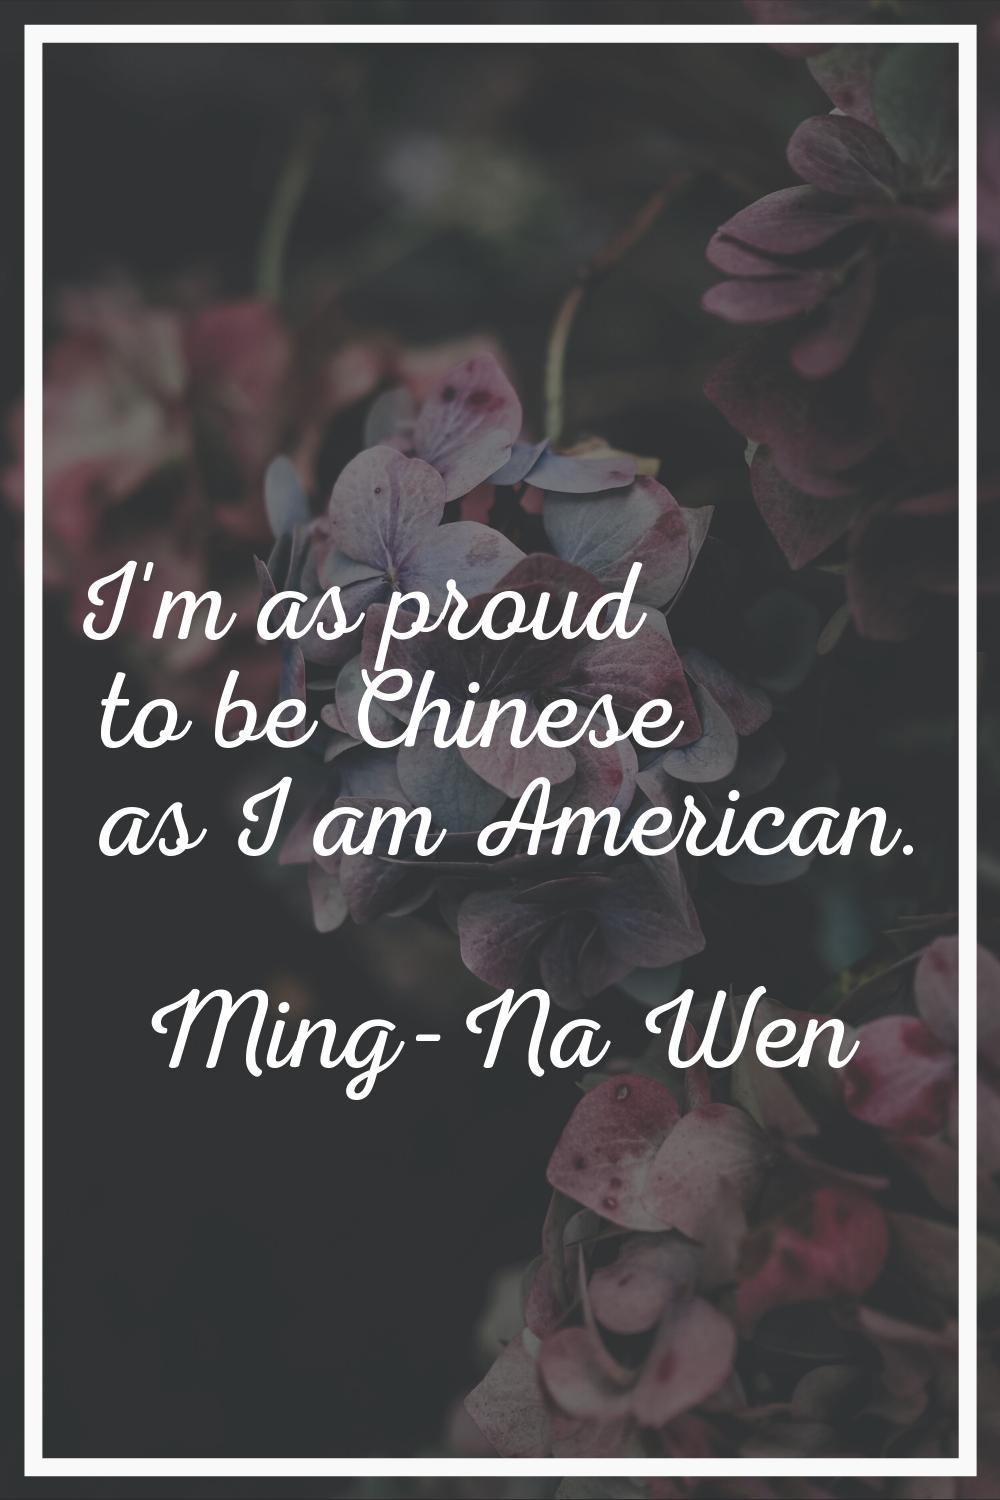 I'm as proud to be Chinese as I am American.